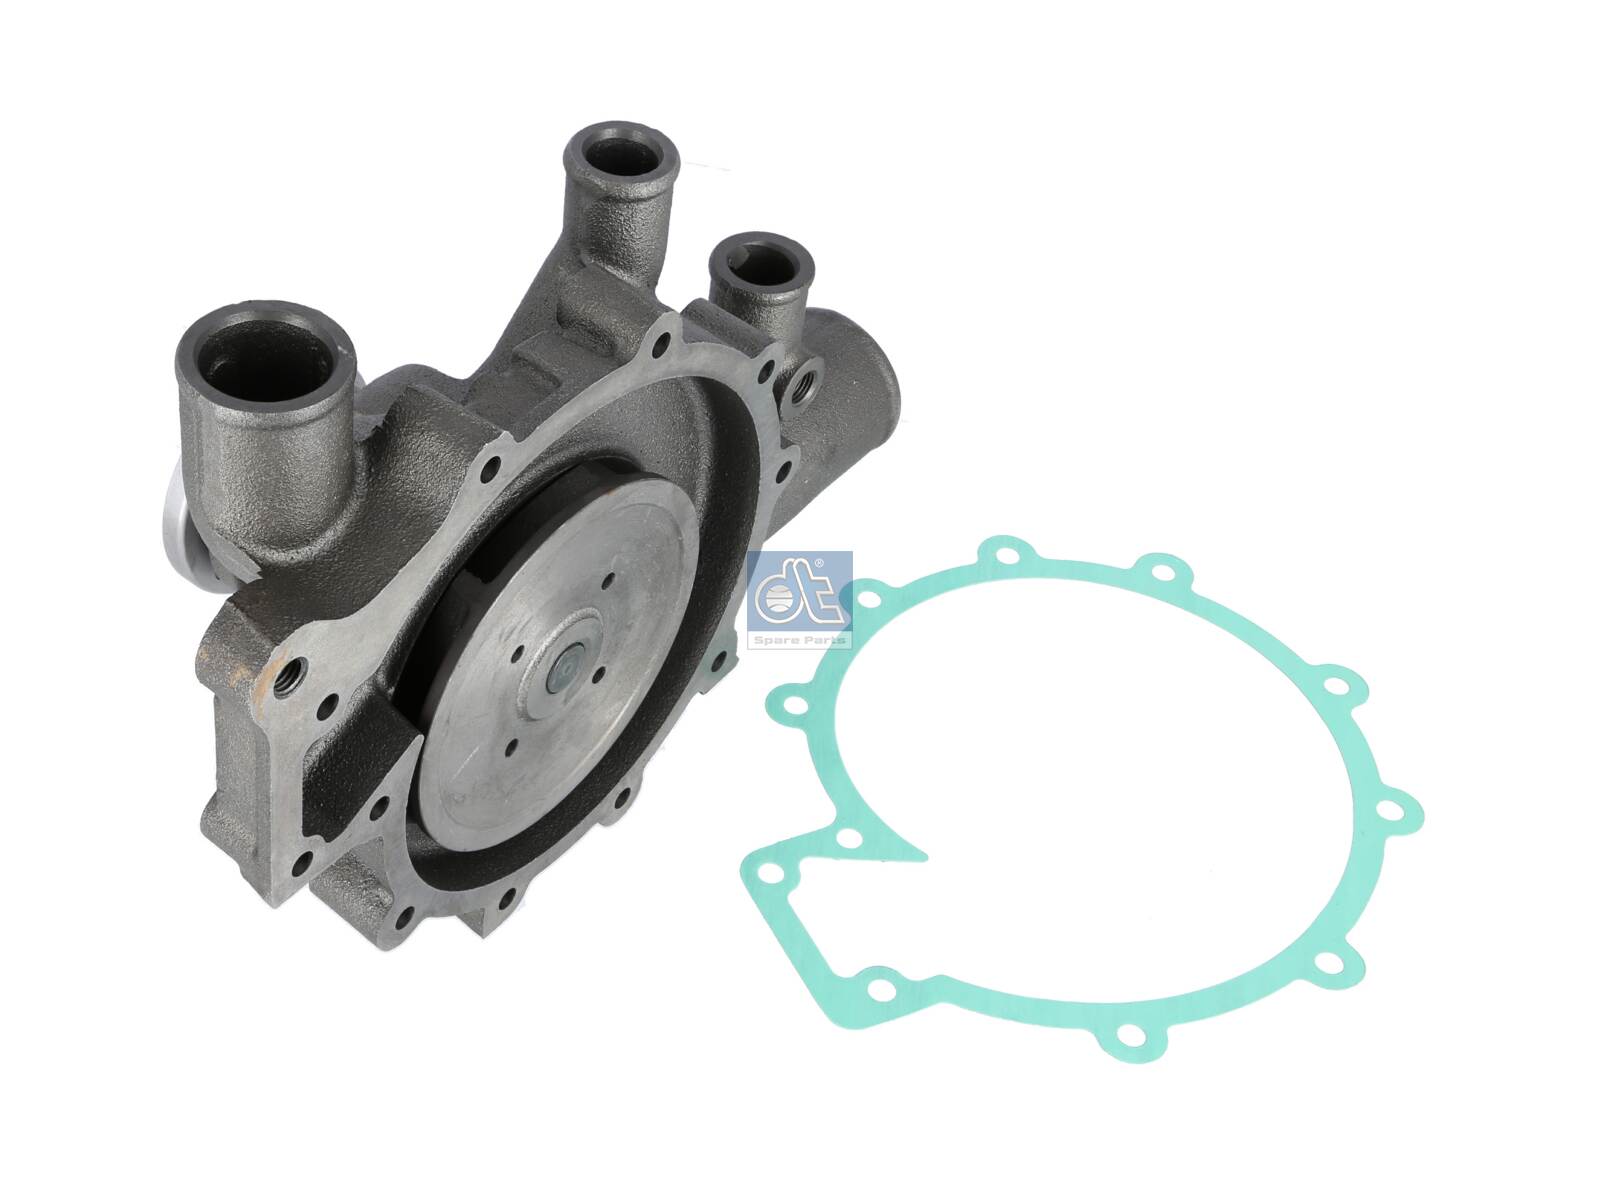 5.41140, Water Pump, engine cooling, DT Spare Parts, 0682747, 0682747A, 682747A, 682747R, 0682747R, 682747, 053253, 062000MX3000, 081200268070, 220890, 350850, 38552, 40754, 57780, 8MP376809134, 9070682747, 01500005, 08.120.0268.070, 19200106, 4057795476936, 8MP376809-134, 053.253